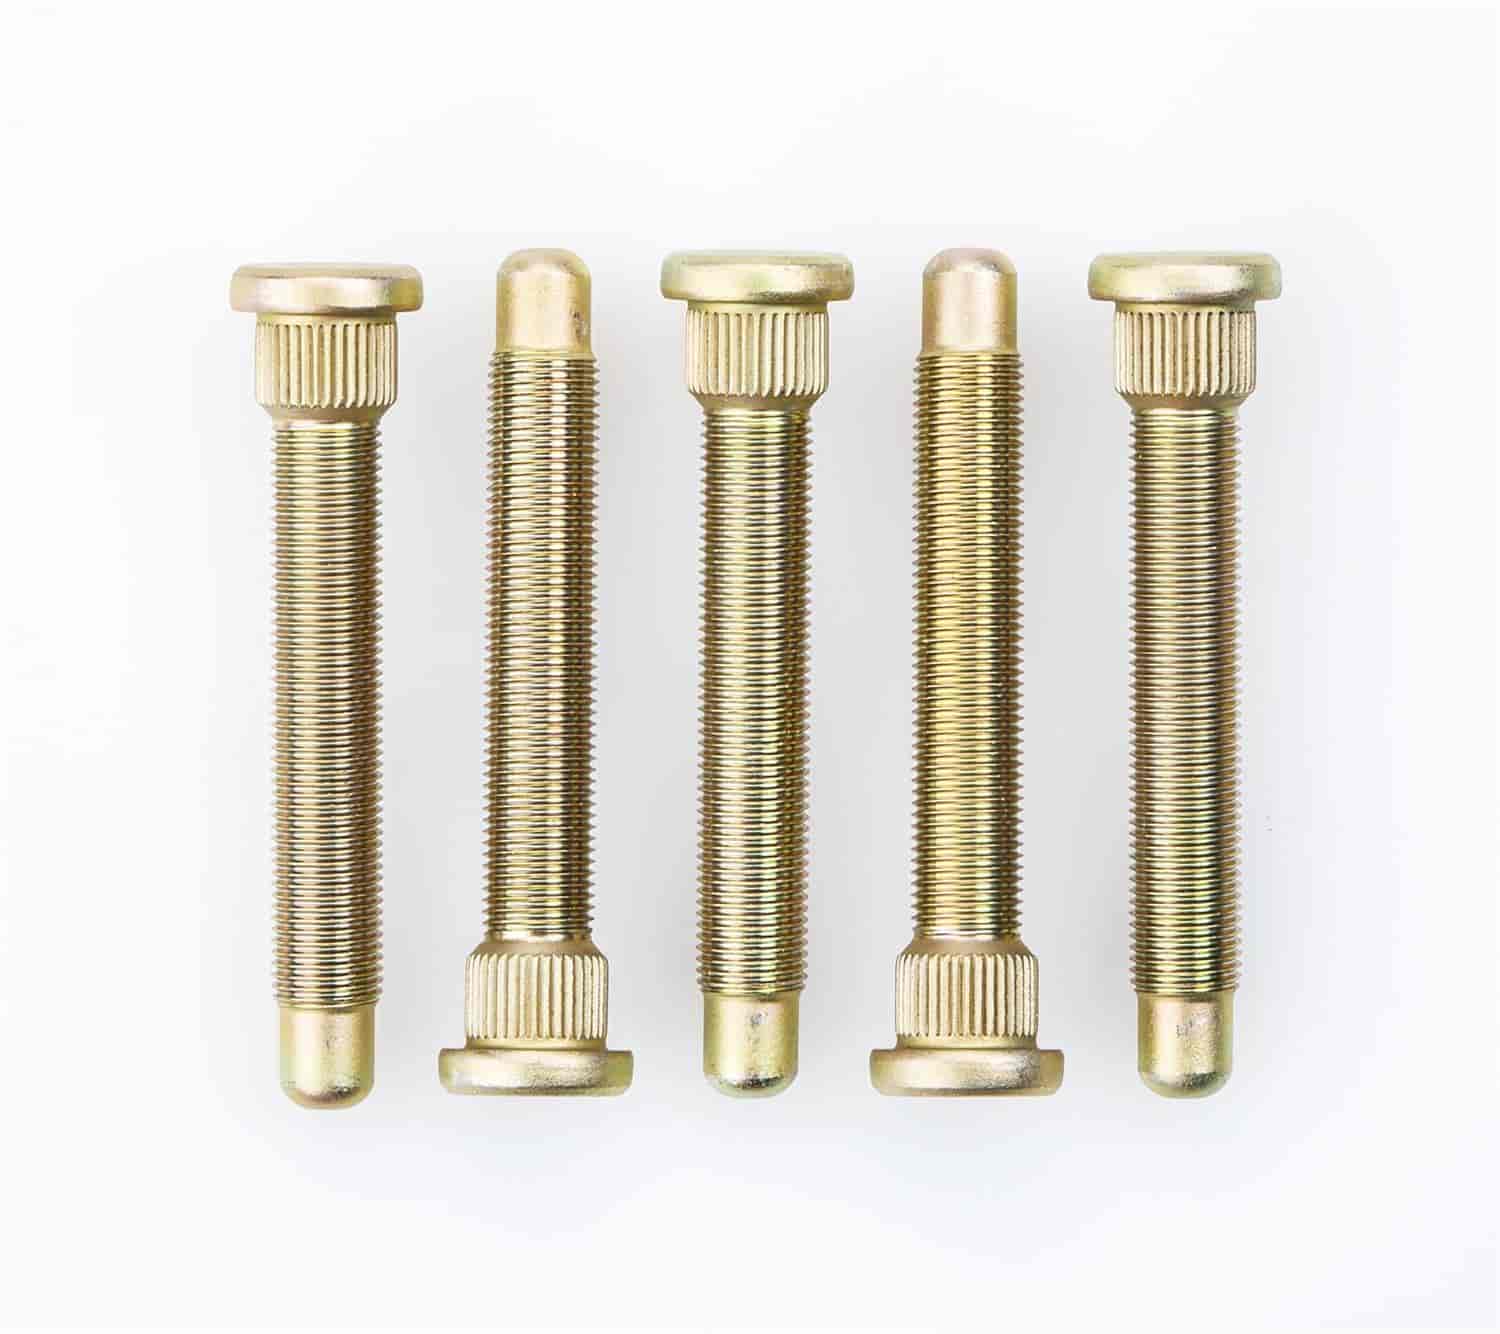 .625" Knurl Wheel Studs Most Ford front/rear and Chrysler front disc brakes